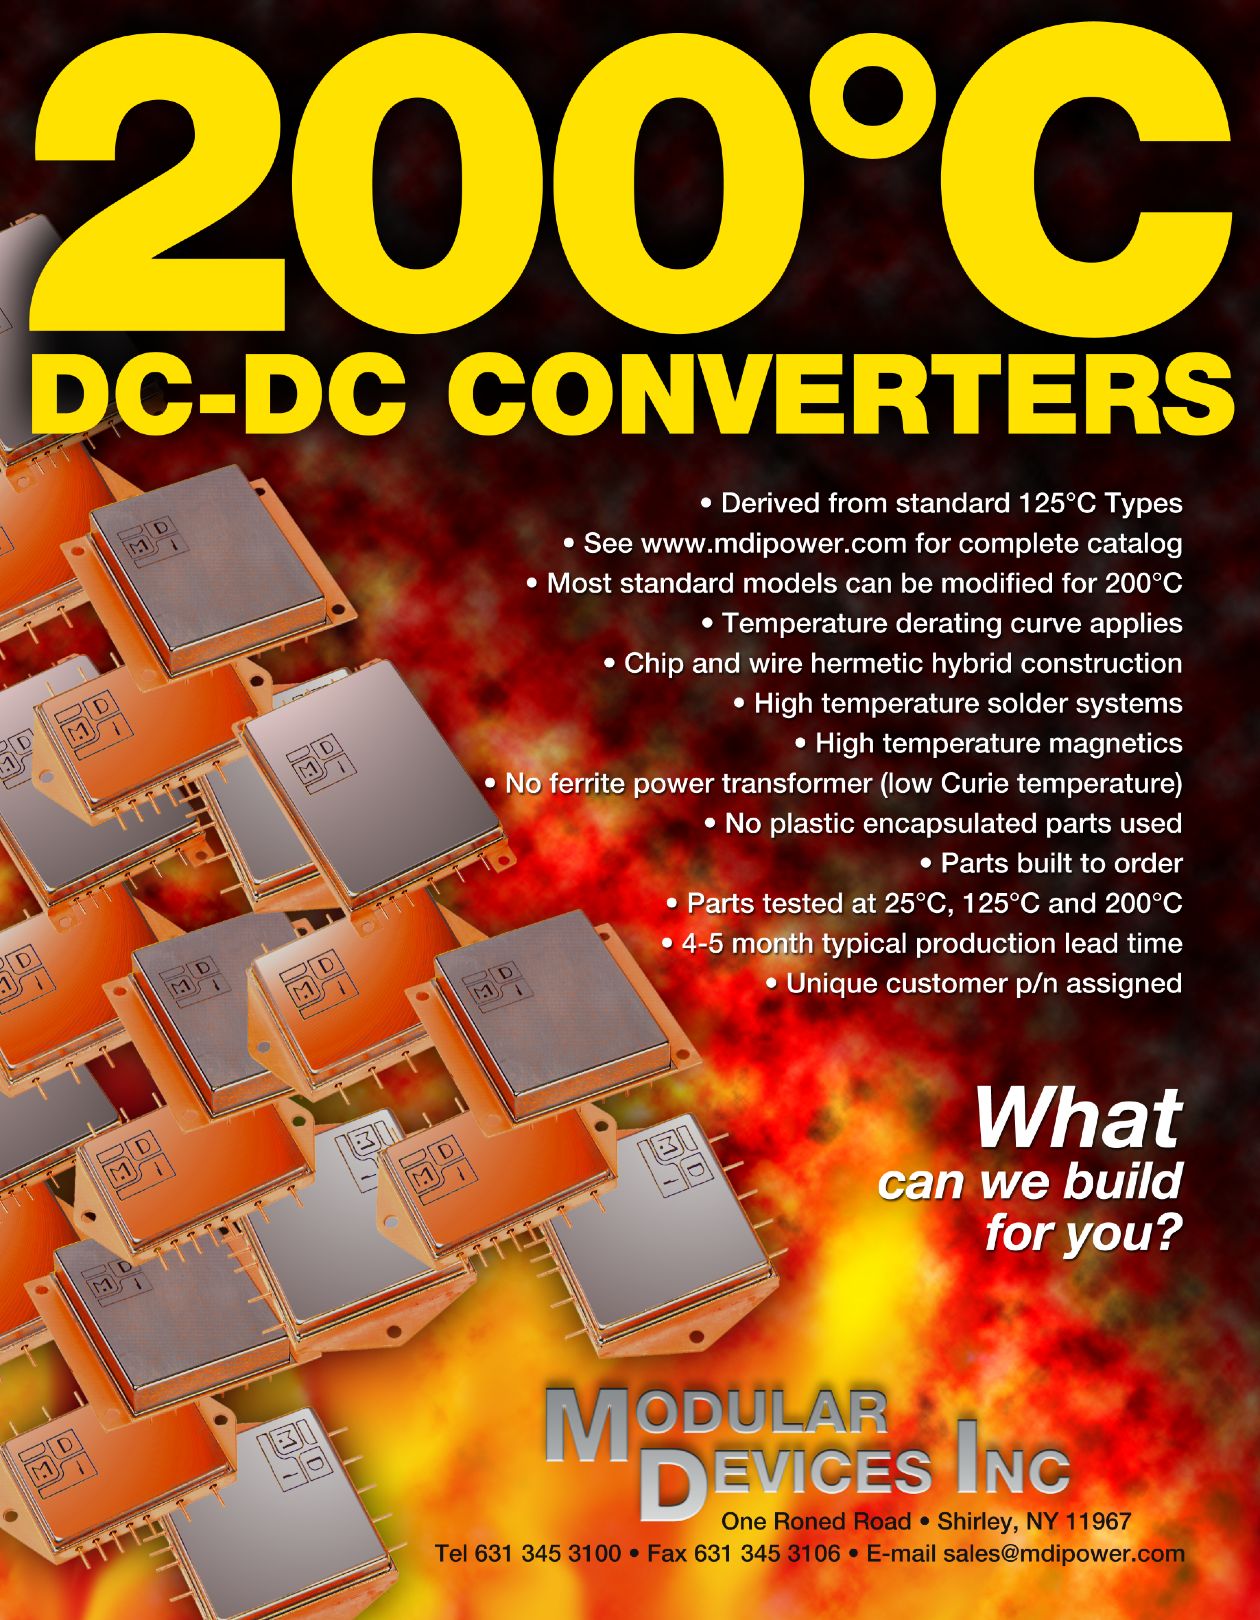 This product sell sheet features a very prominent headline using the words “200-degree DC-DC converters” over a large collection of small electronic devices roiling atop an intense fire.